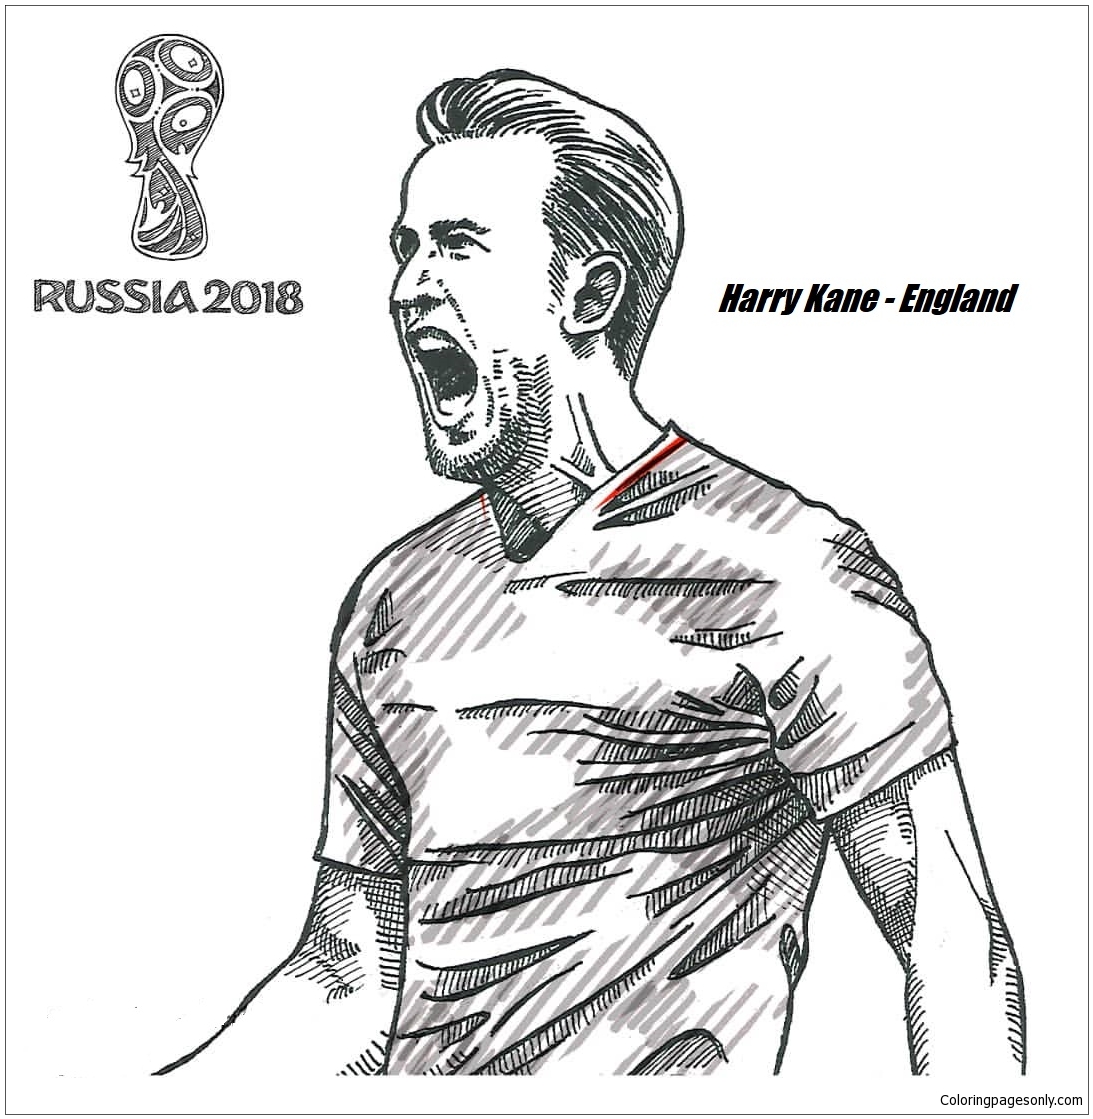 Download Harry Kane-image 11 Coloring Page - Free Coloring Pages Online